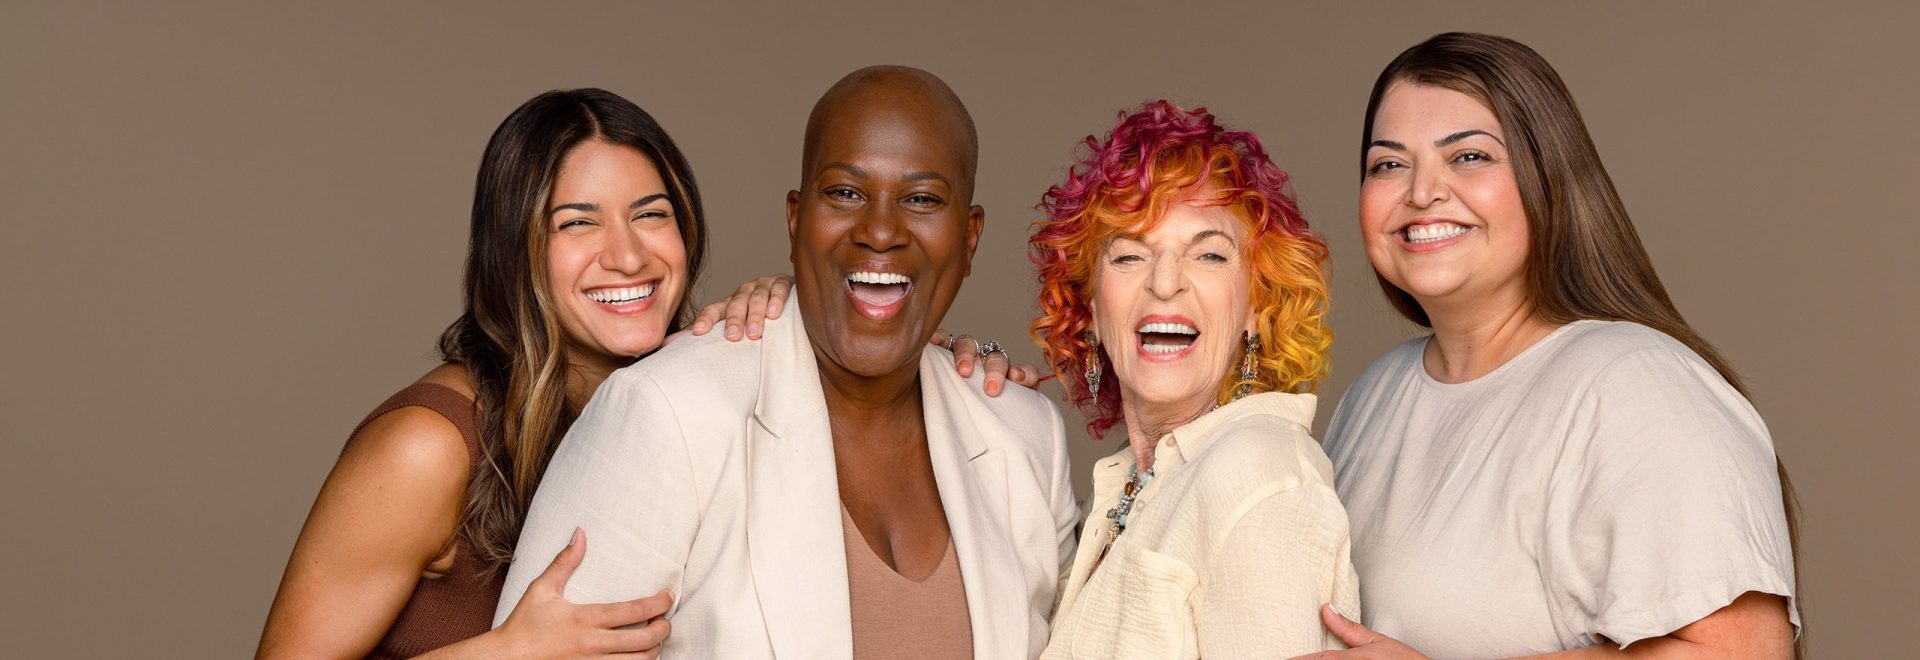 Four women in a good mood, laughing and smiling